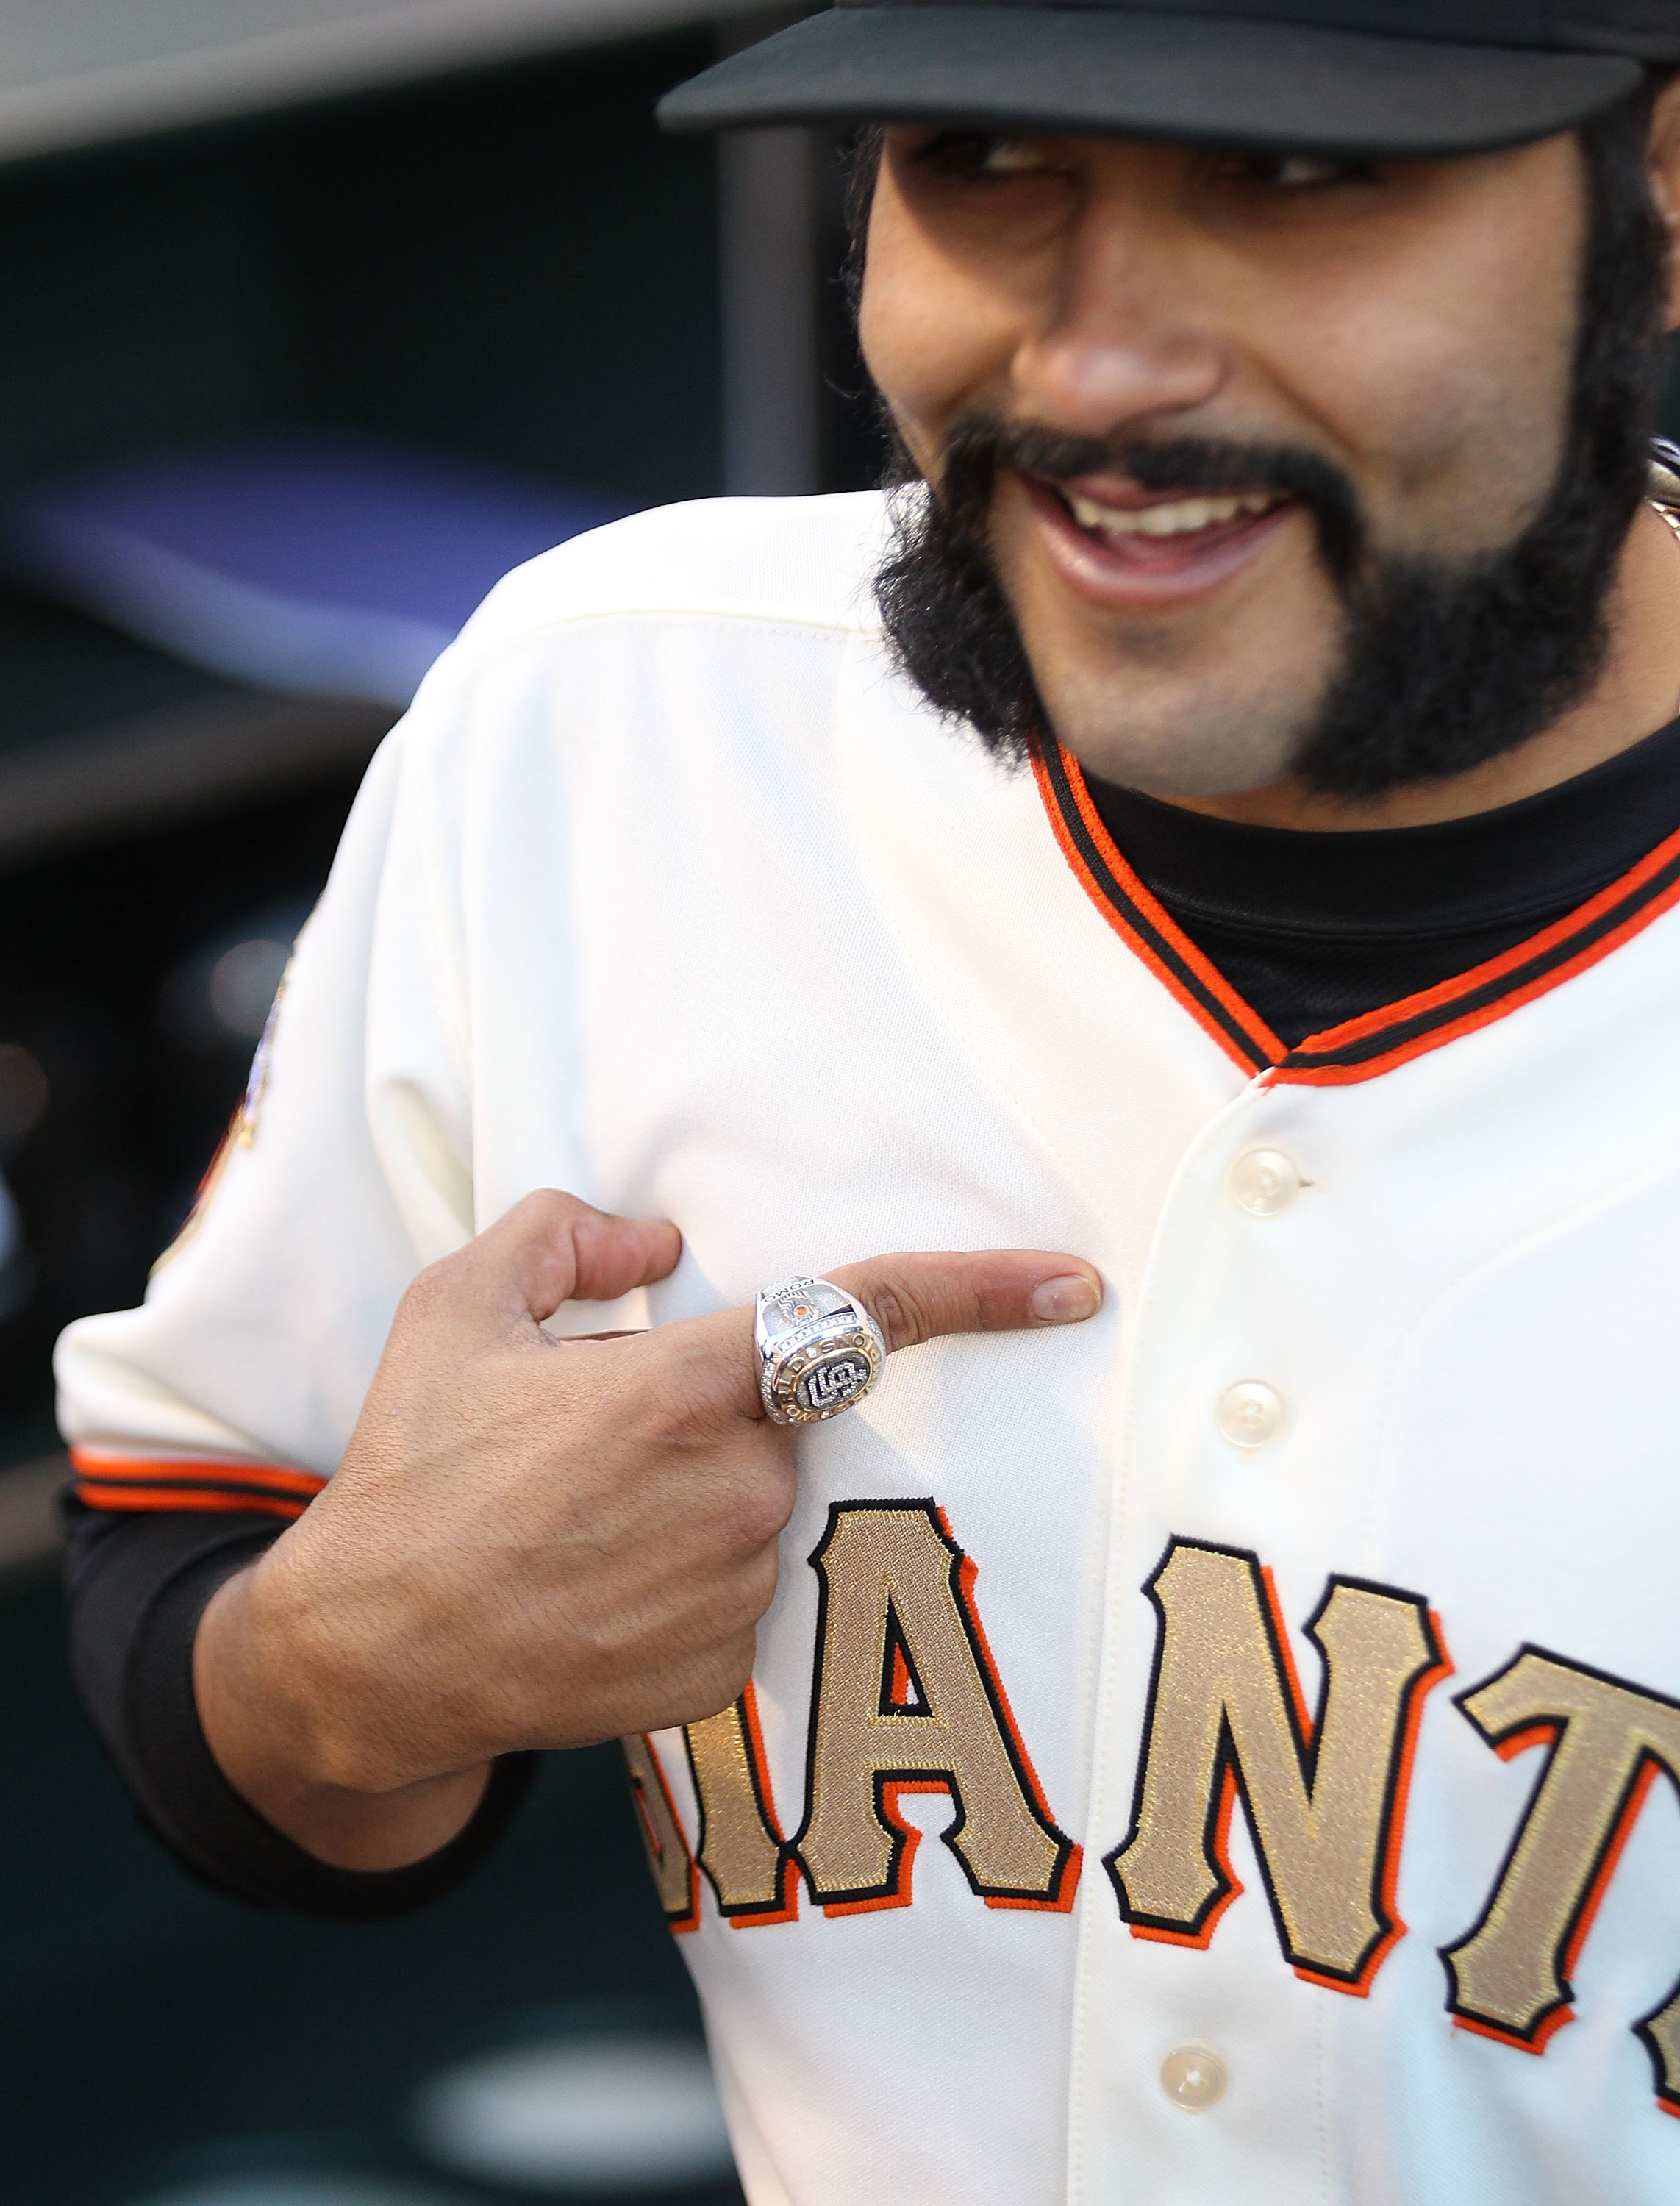 10 Giants from 2010: Brian Wilson on securing S.F.'s first title